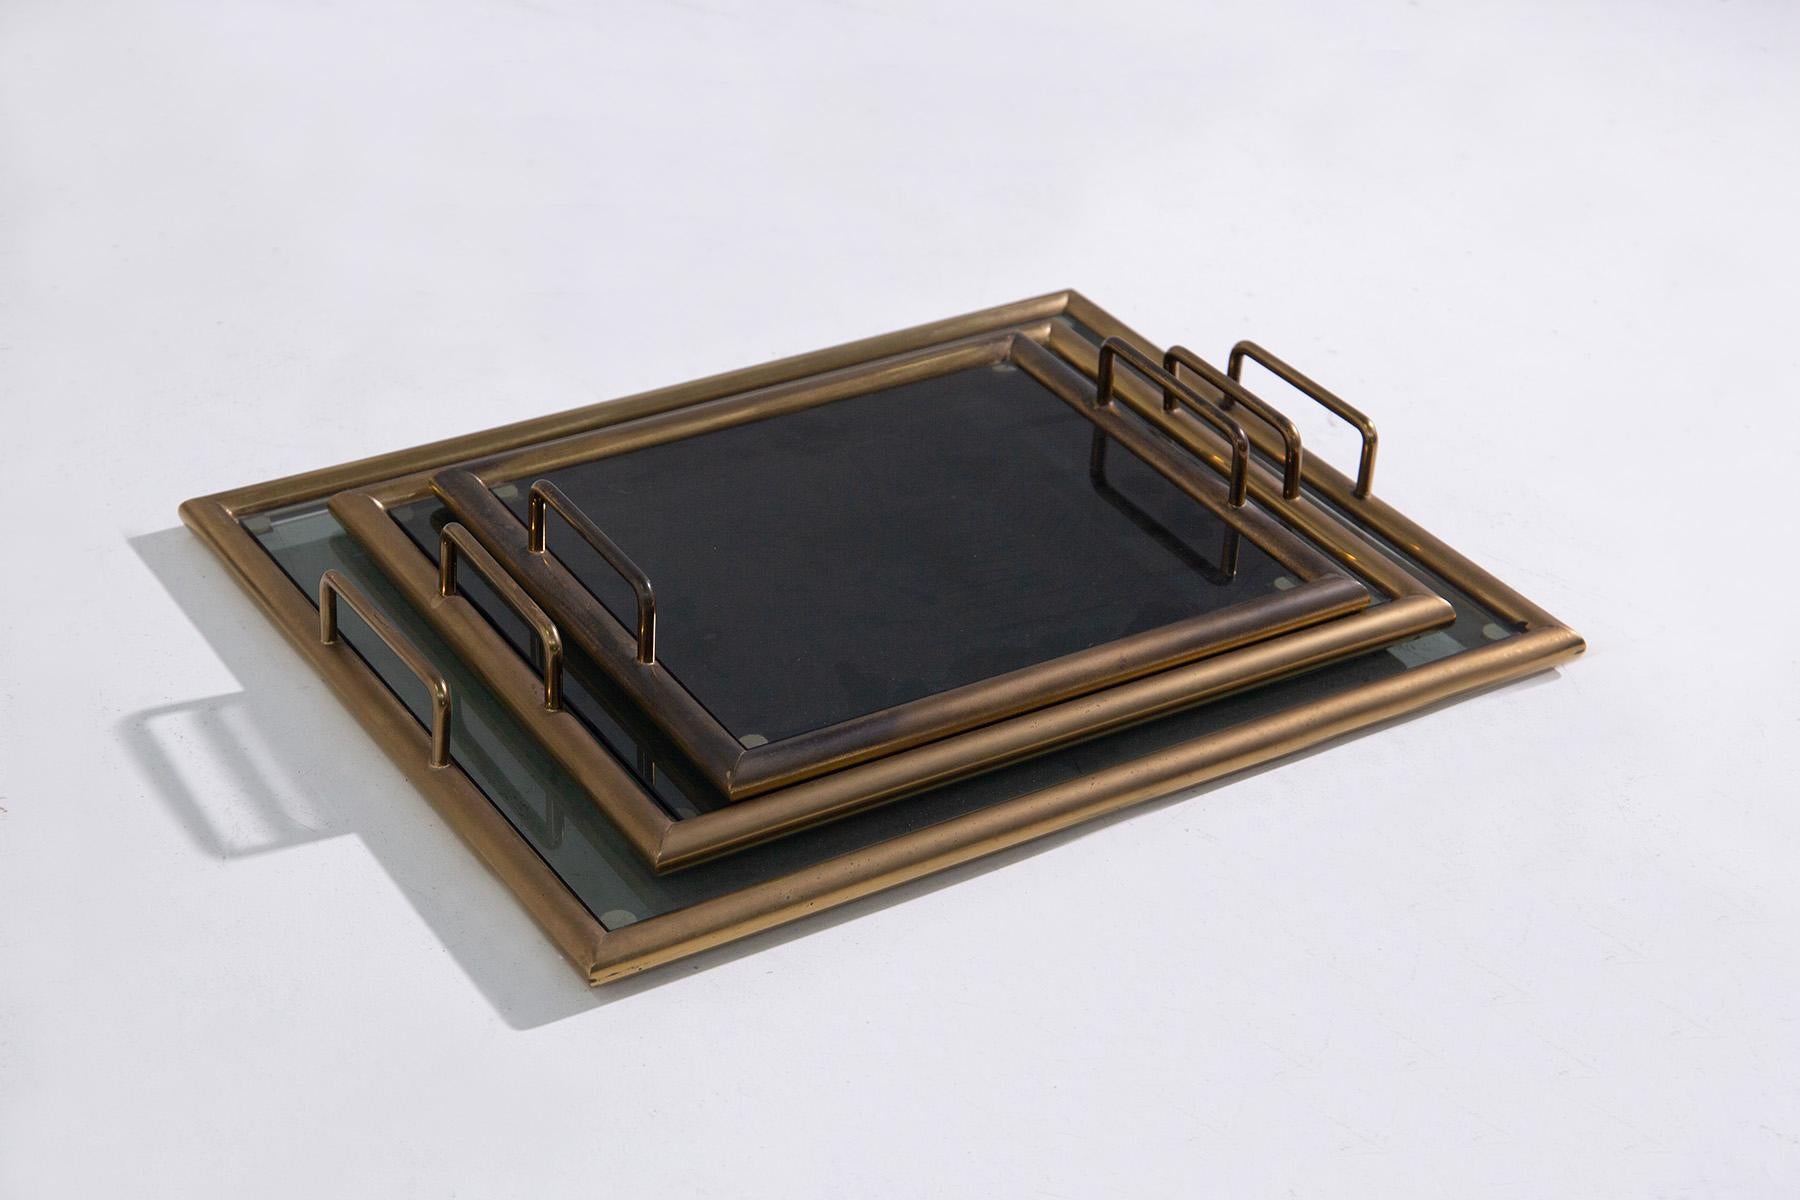 These vintage 1950s Italian-made trays exude timeless elegance and sophistication. Crafted with sturdy brass frames and topped with transparent dark smoked glass, each tray epitomizes luxury and refinement. The inclusion of brass handles enhances